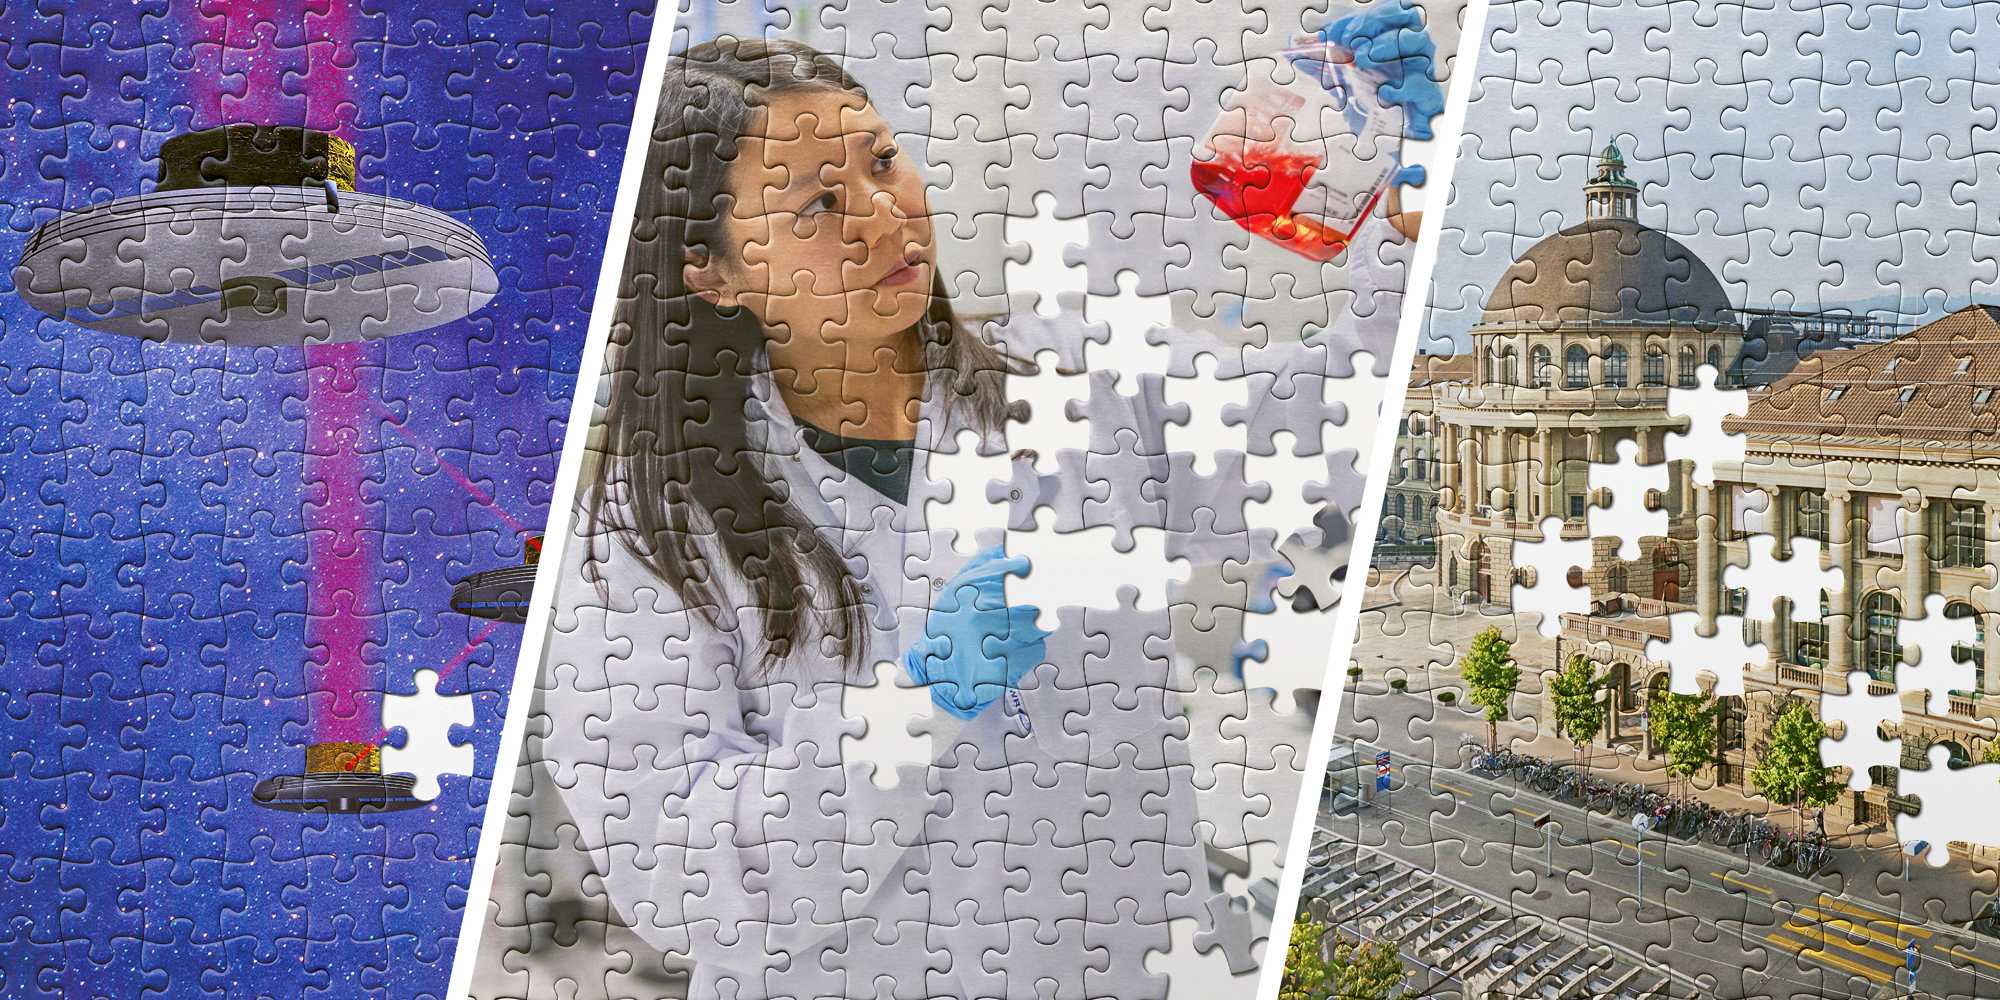 Puzzle of three images: Drones in the air, a woman in the lab and the ETH main building. Some puzzle pieces are missing.